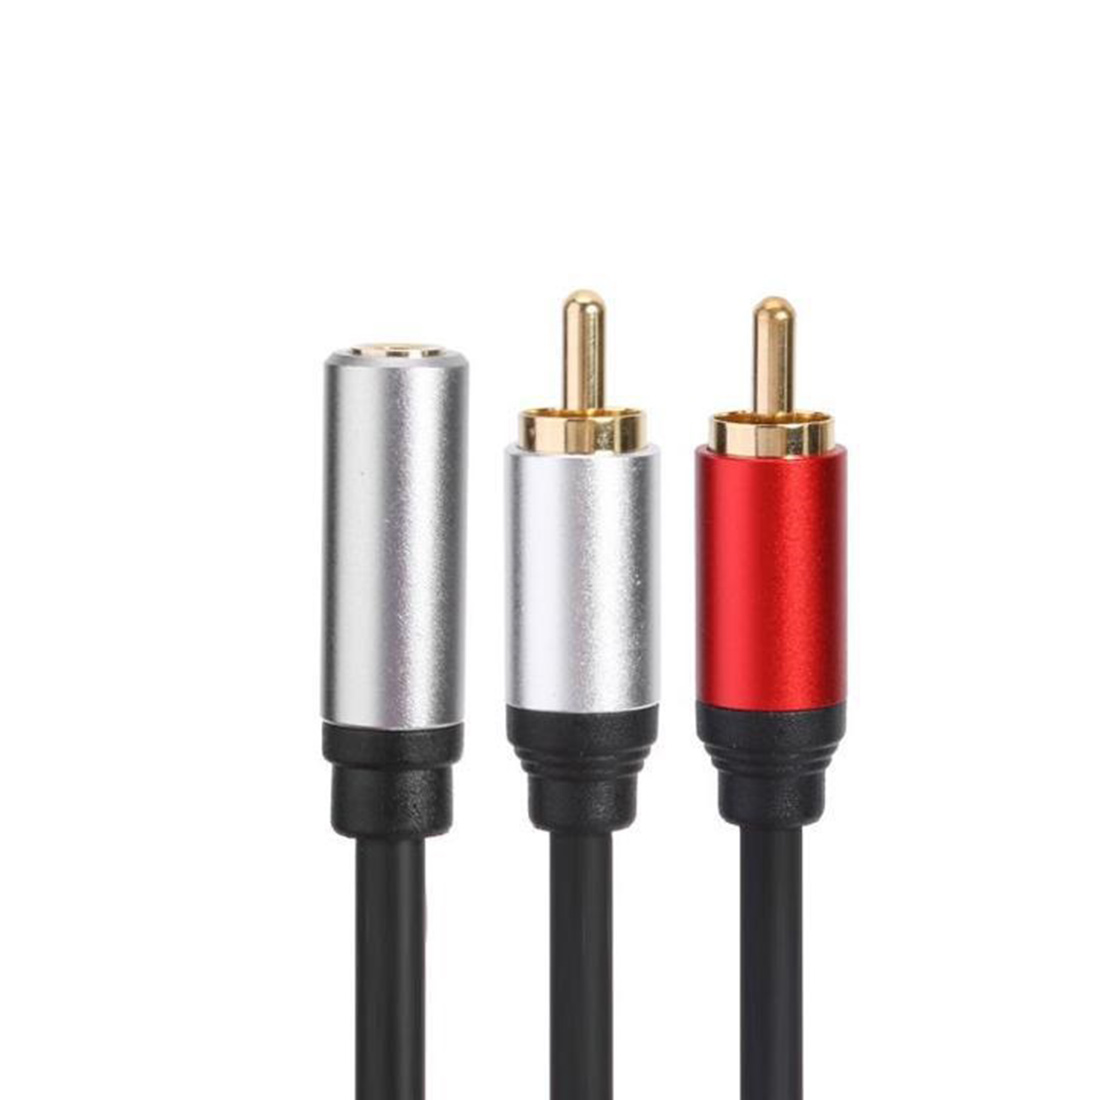 RCA Cable 2RCA Male to 3.5mm Female Audio Aux Cable 3.5mm Jack Rca Cable for MP3 Phone Home Theater DVD 2RCA Audio Cable - image 2 of 5